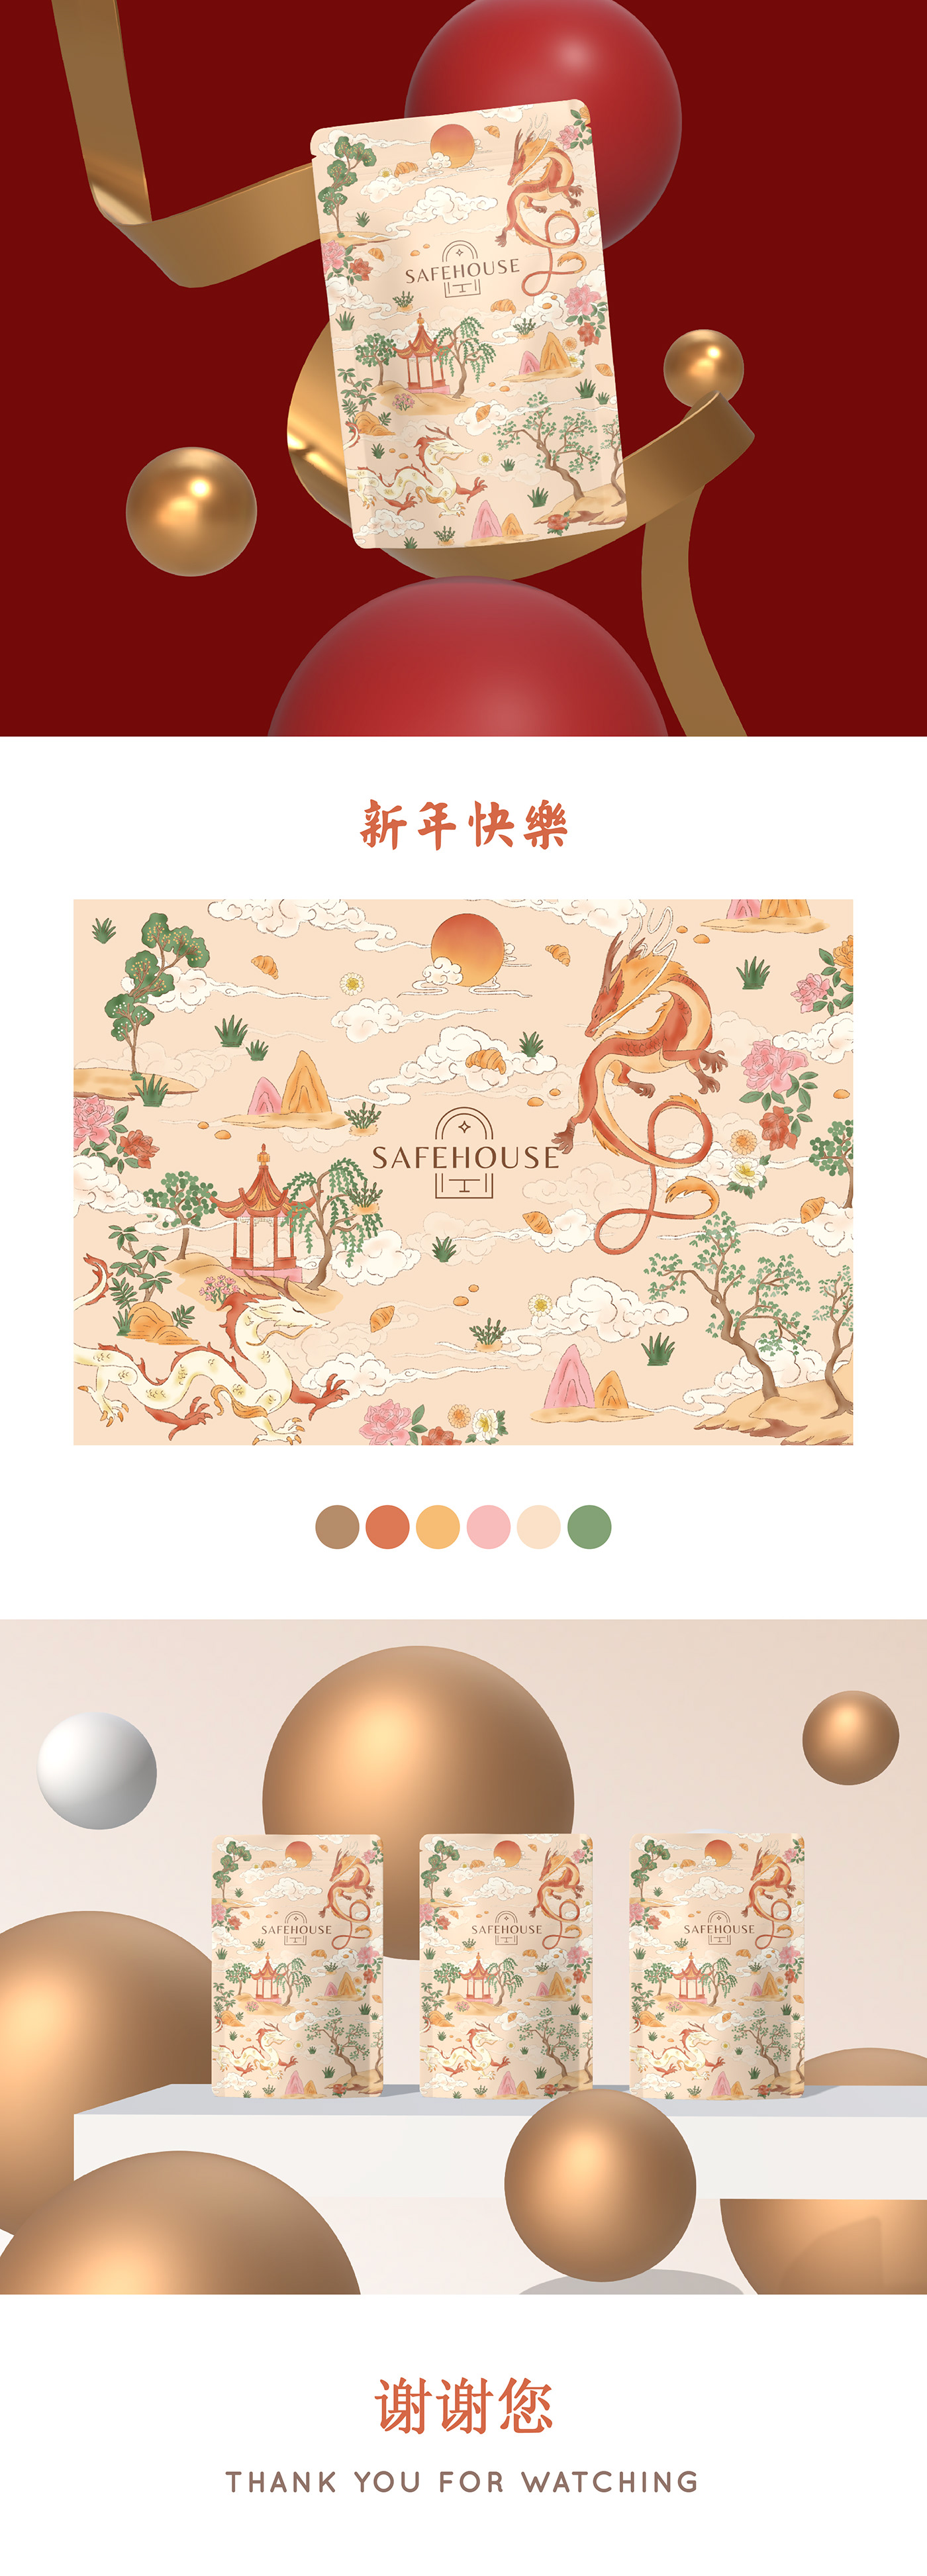 ILLUSTRATION  chinese new year packaging design